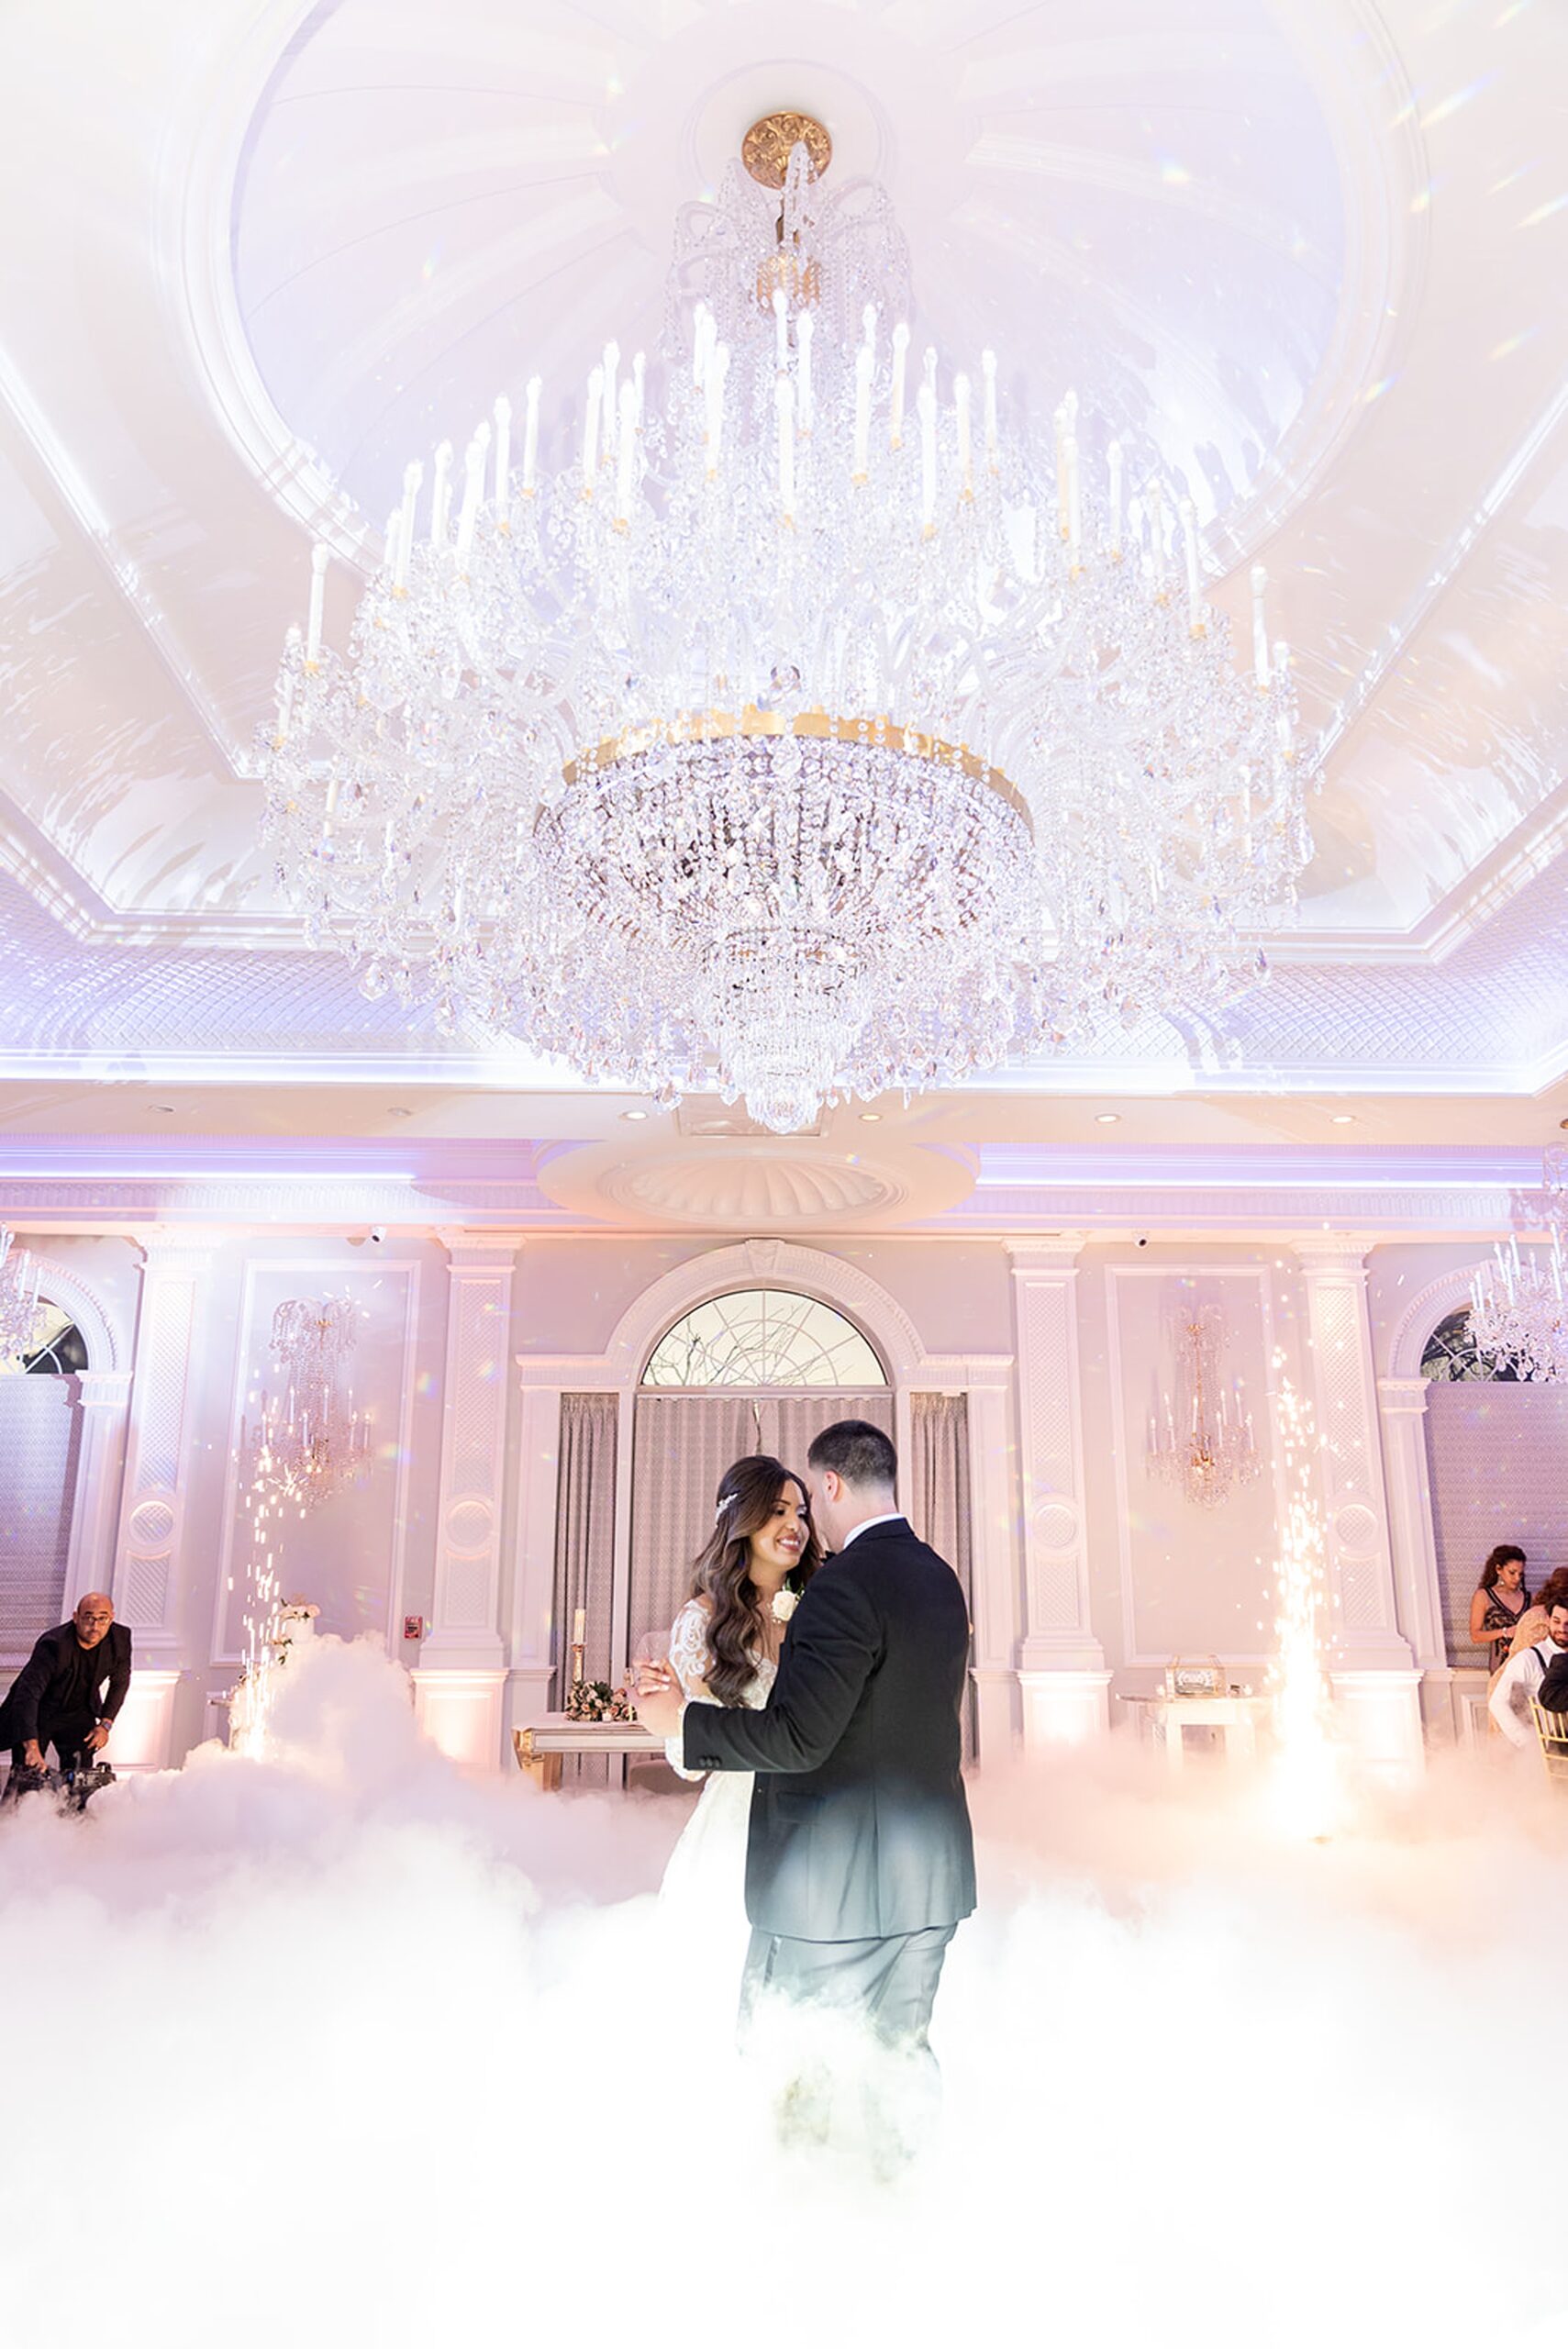 Newlyweds dance under a large crystal chandelier on a dance floor covered in fog with fireworks at the rockleigh wedding venue